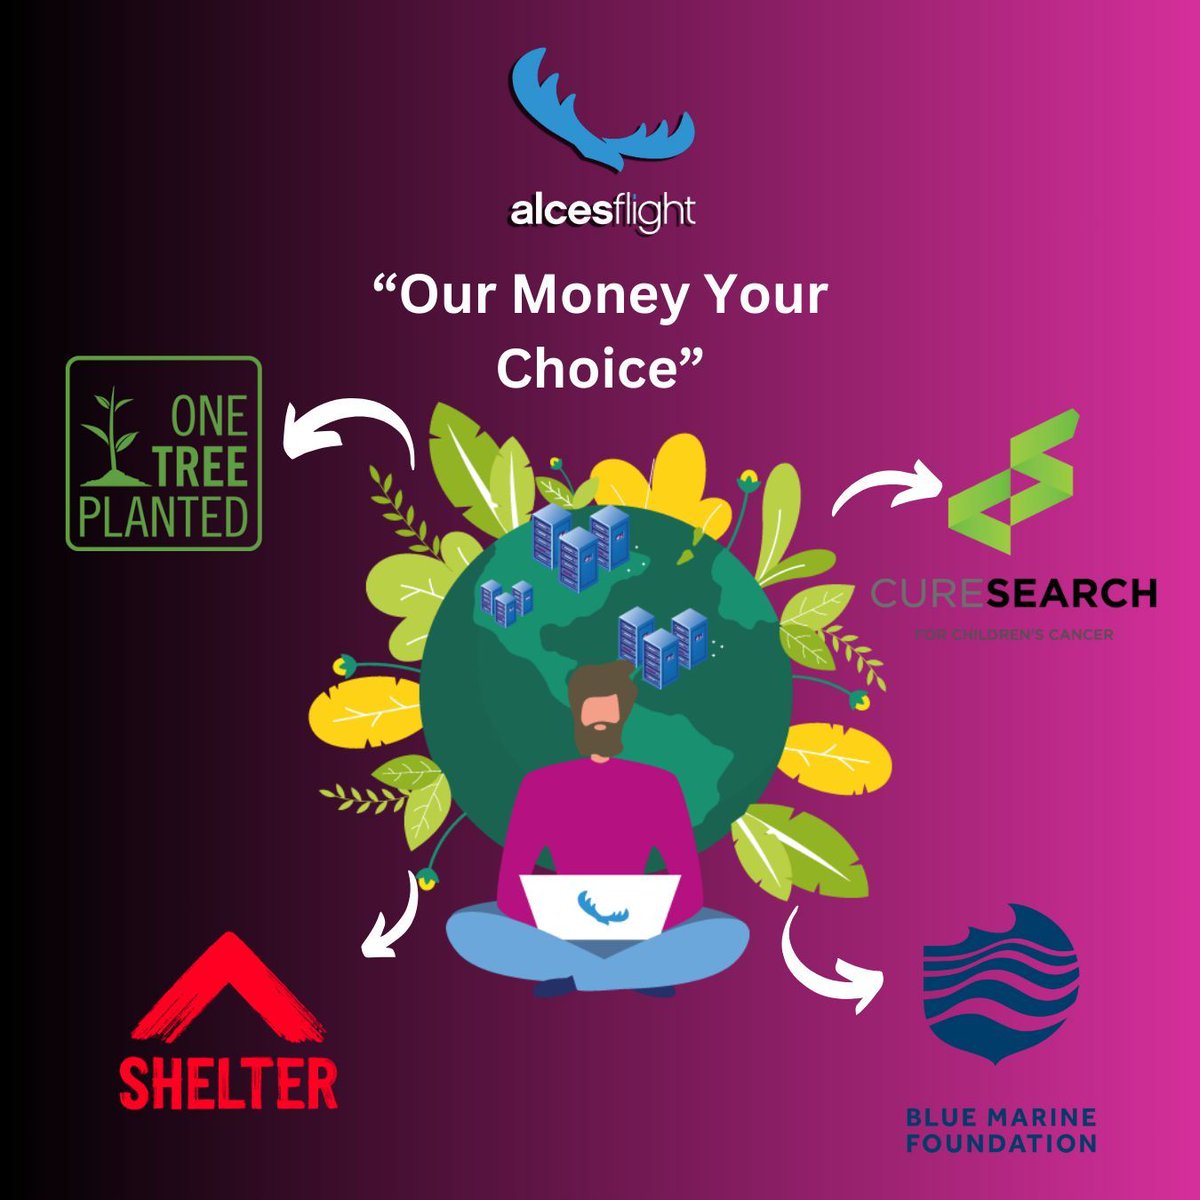 Our 'Our Money, Your Choice' campaign raised £1,050+ for causes, sparked conversations, and empowered action. We are excited to continue this tradition at future events and expand our charitable initiatives to other #HPC conferences. #Impact #ISC #SC #CIUK